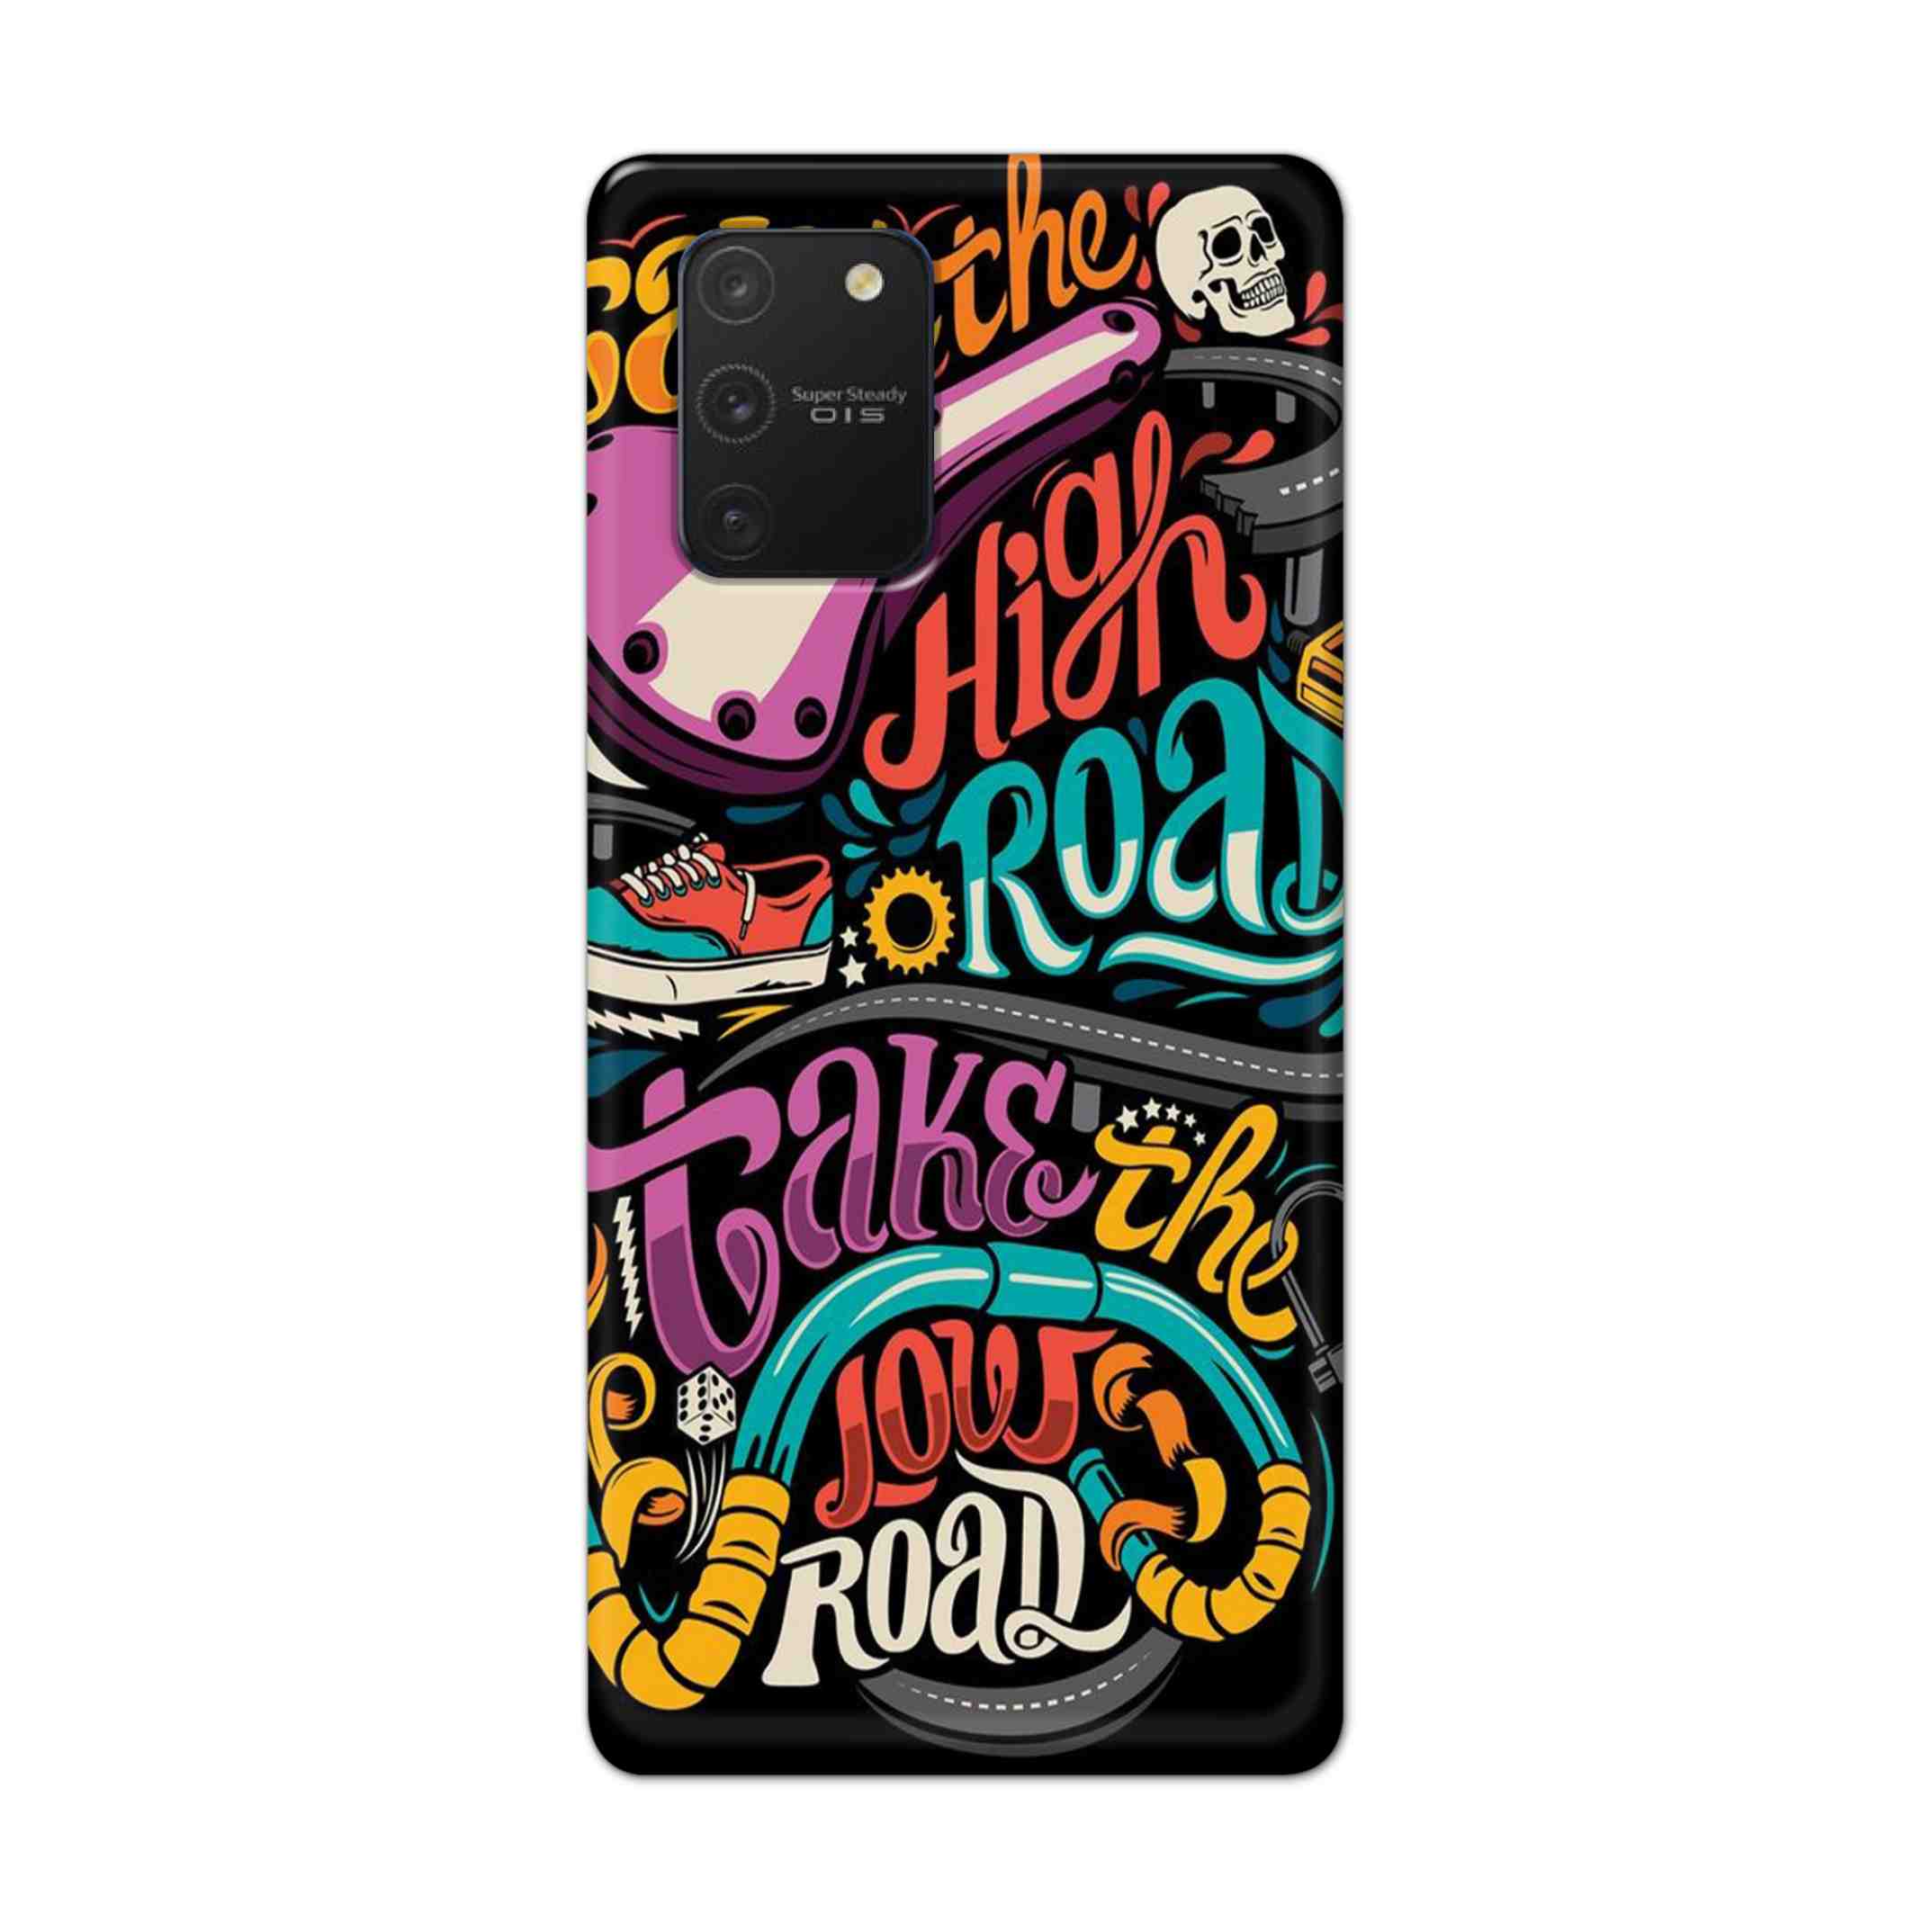 Buy Take The High Road Hard Back Mobile Phone Case Cover For Samsung Galaxy S10 Lite Online